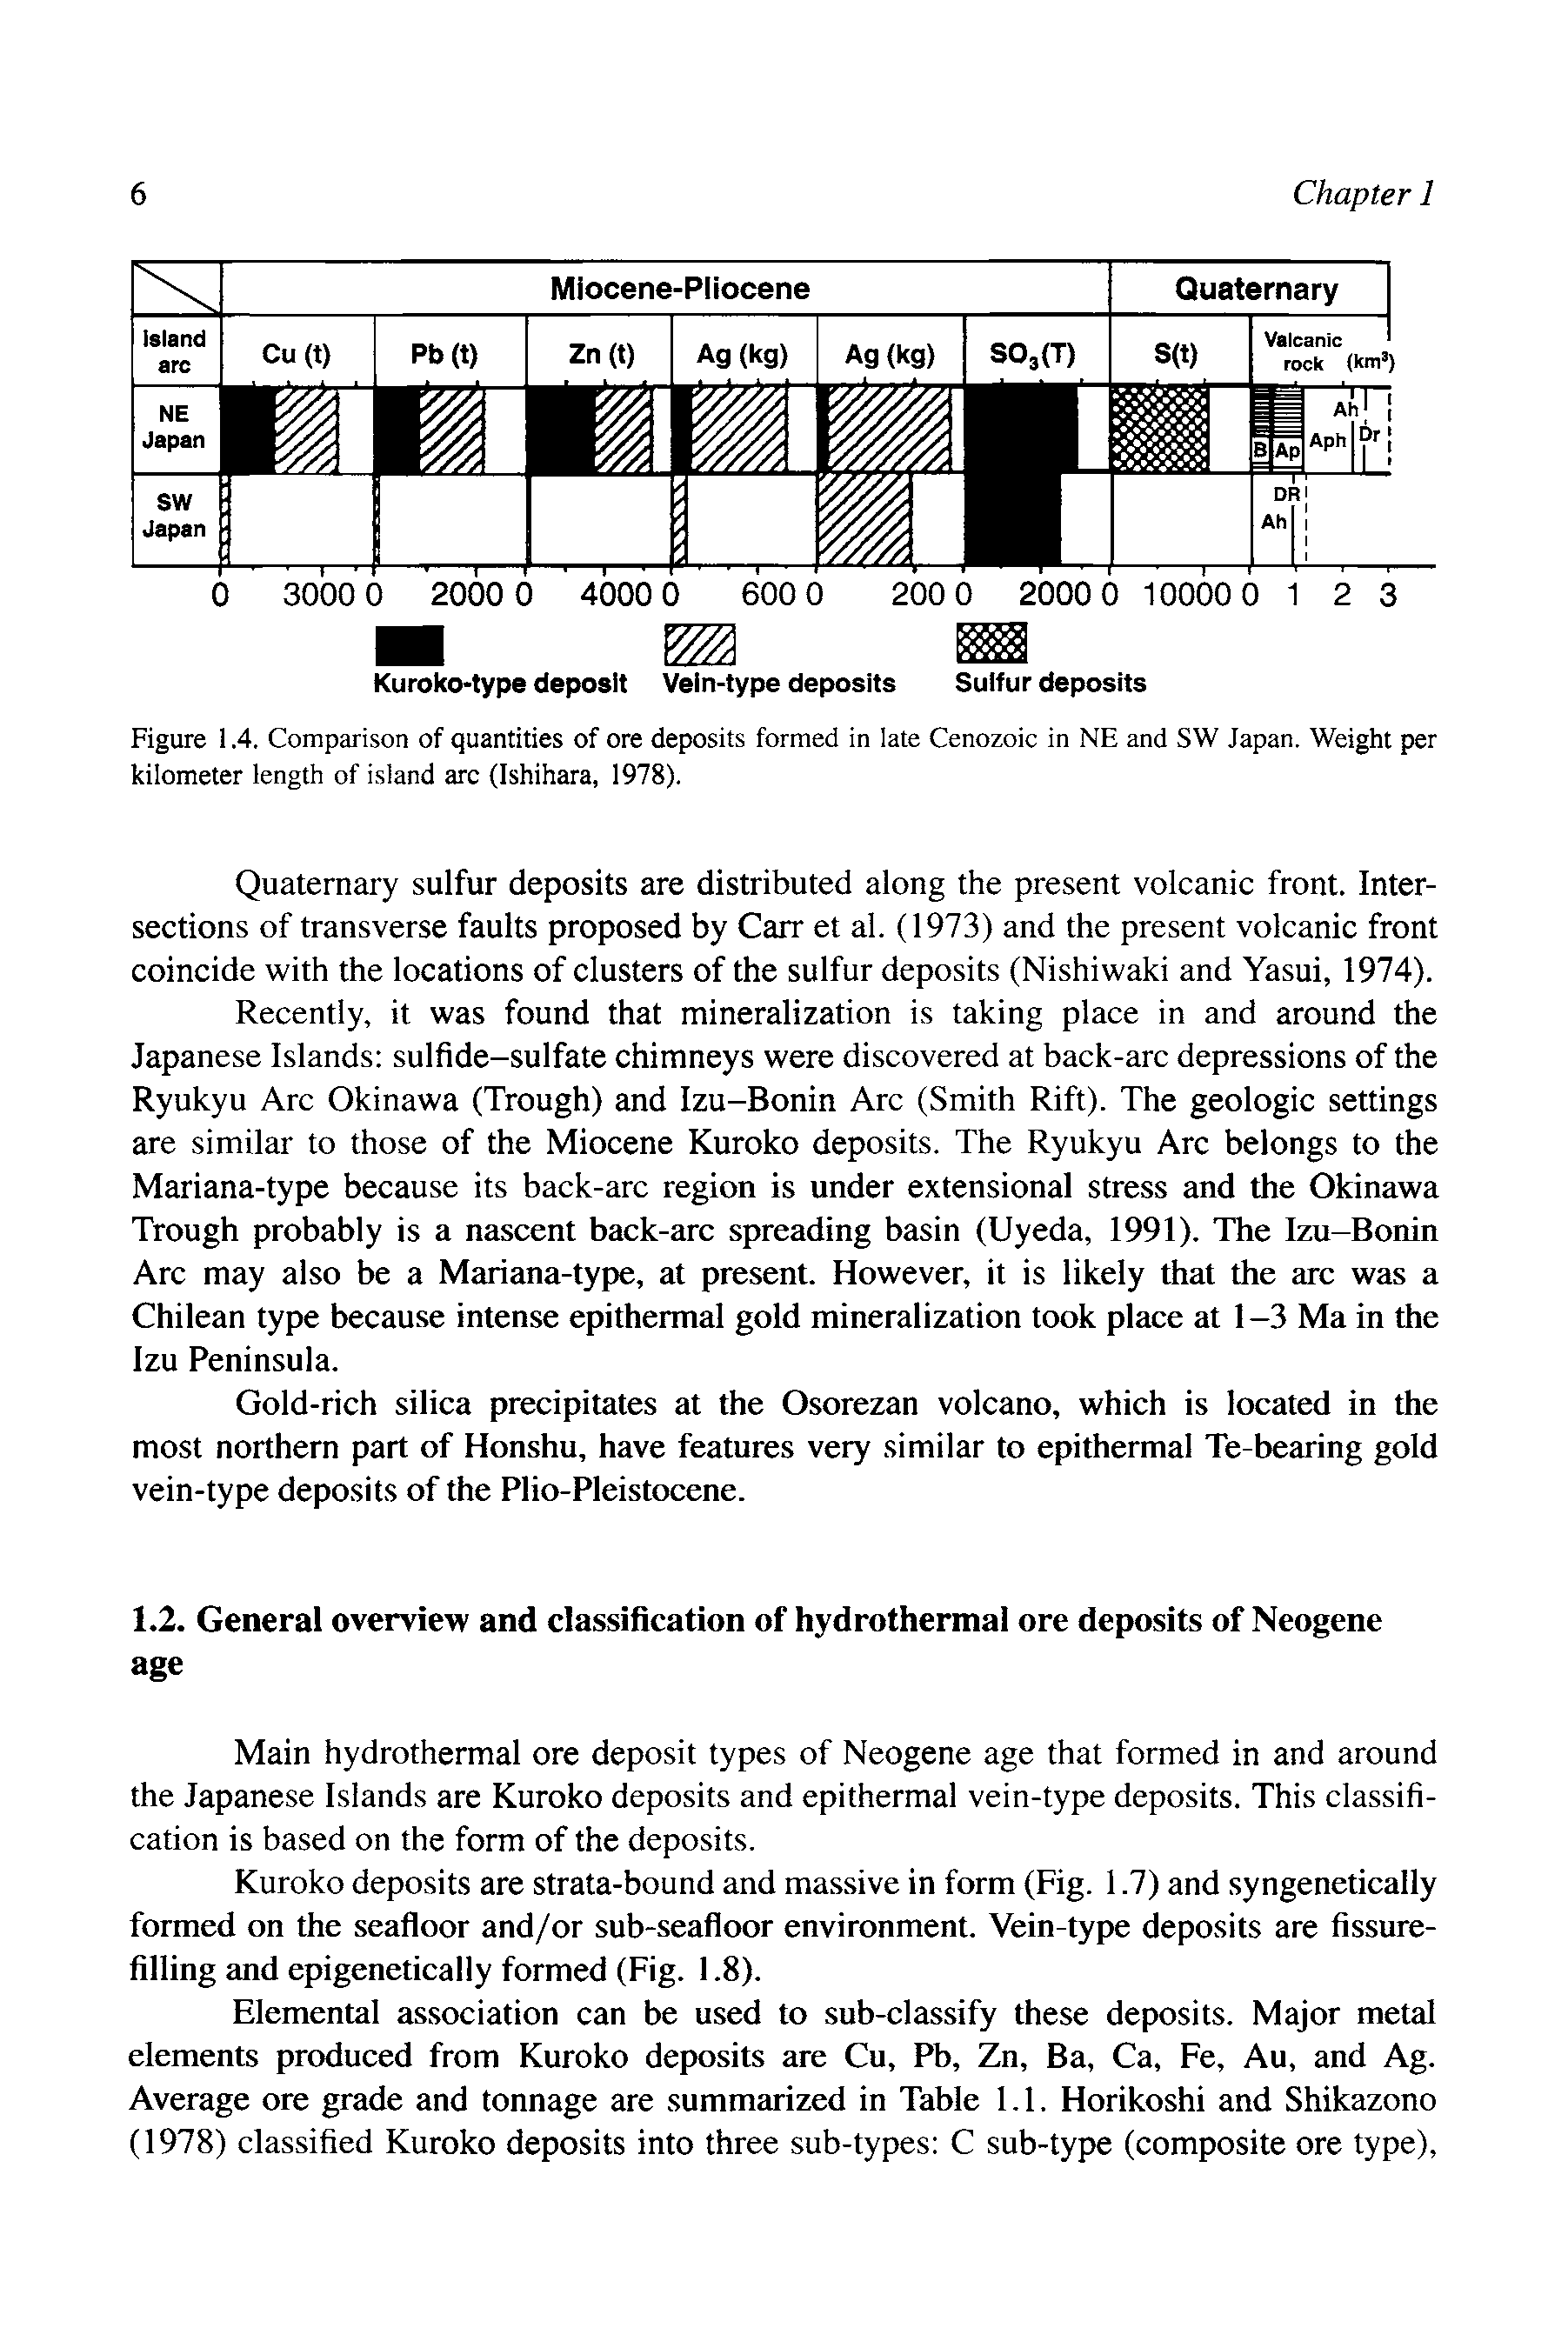 Figure 1.4. Comparison of quantities of ore deposits formed in late Cenozoic in NE and SW Japan. Weight per kilometer length of island arc (Ishihara, 1978).